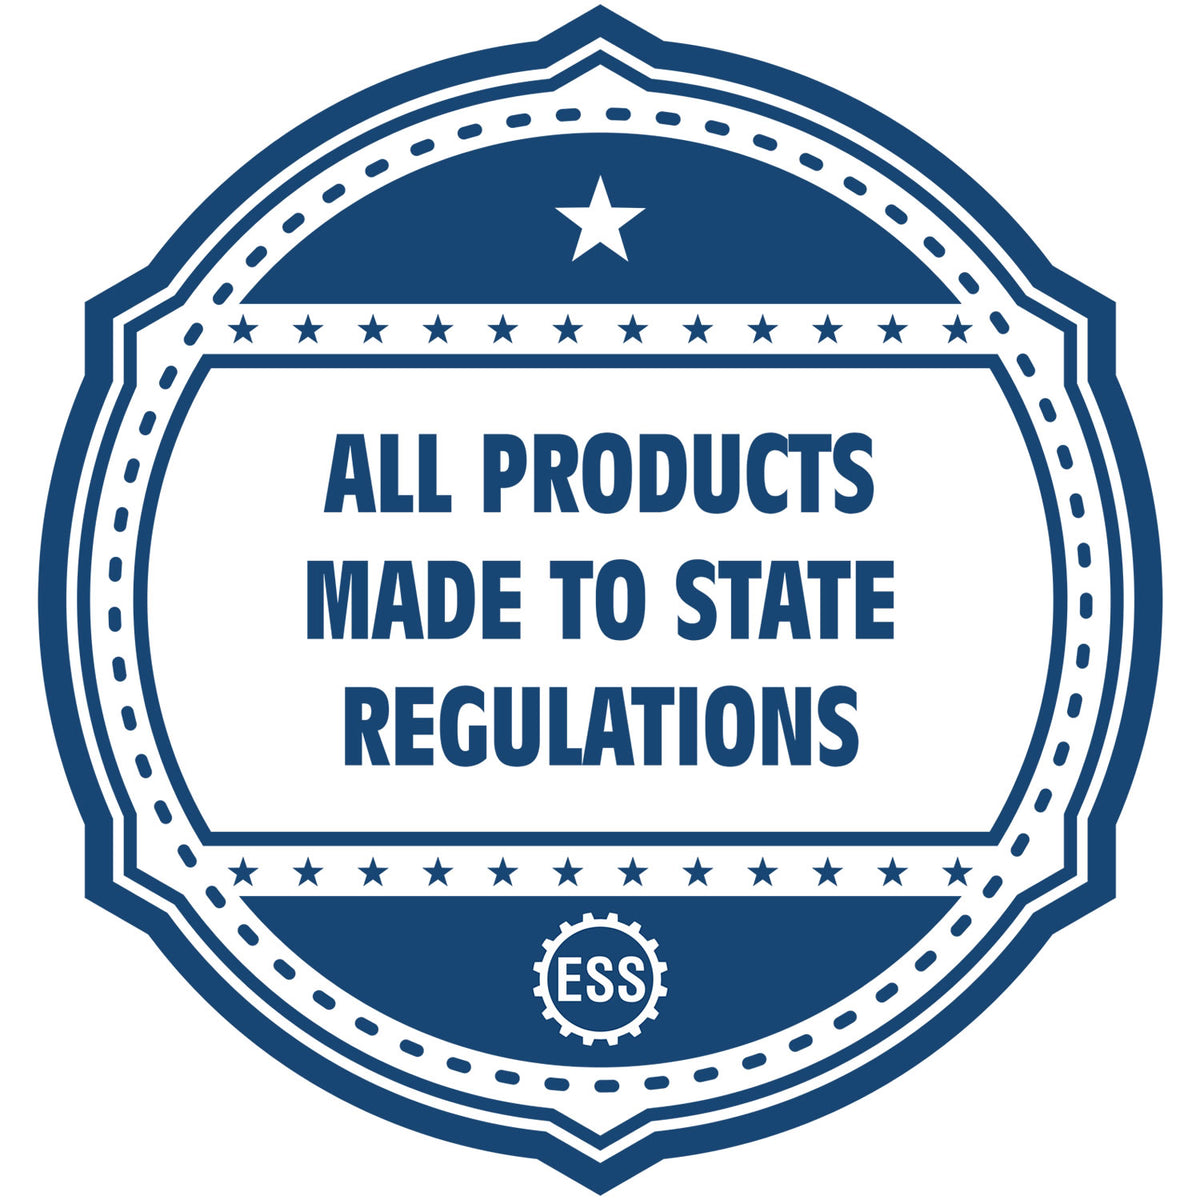 An icon or badge element for the Premium MaxLight Pre-Inked Florida Engineering Stamp showing that this product is made in compliance with state regulations.